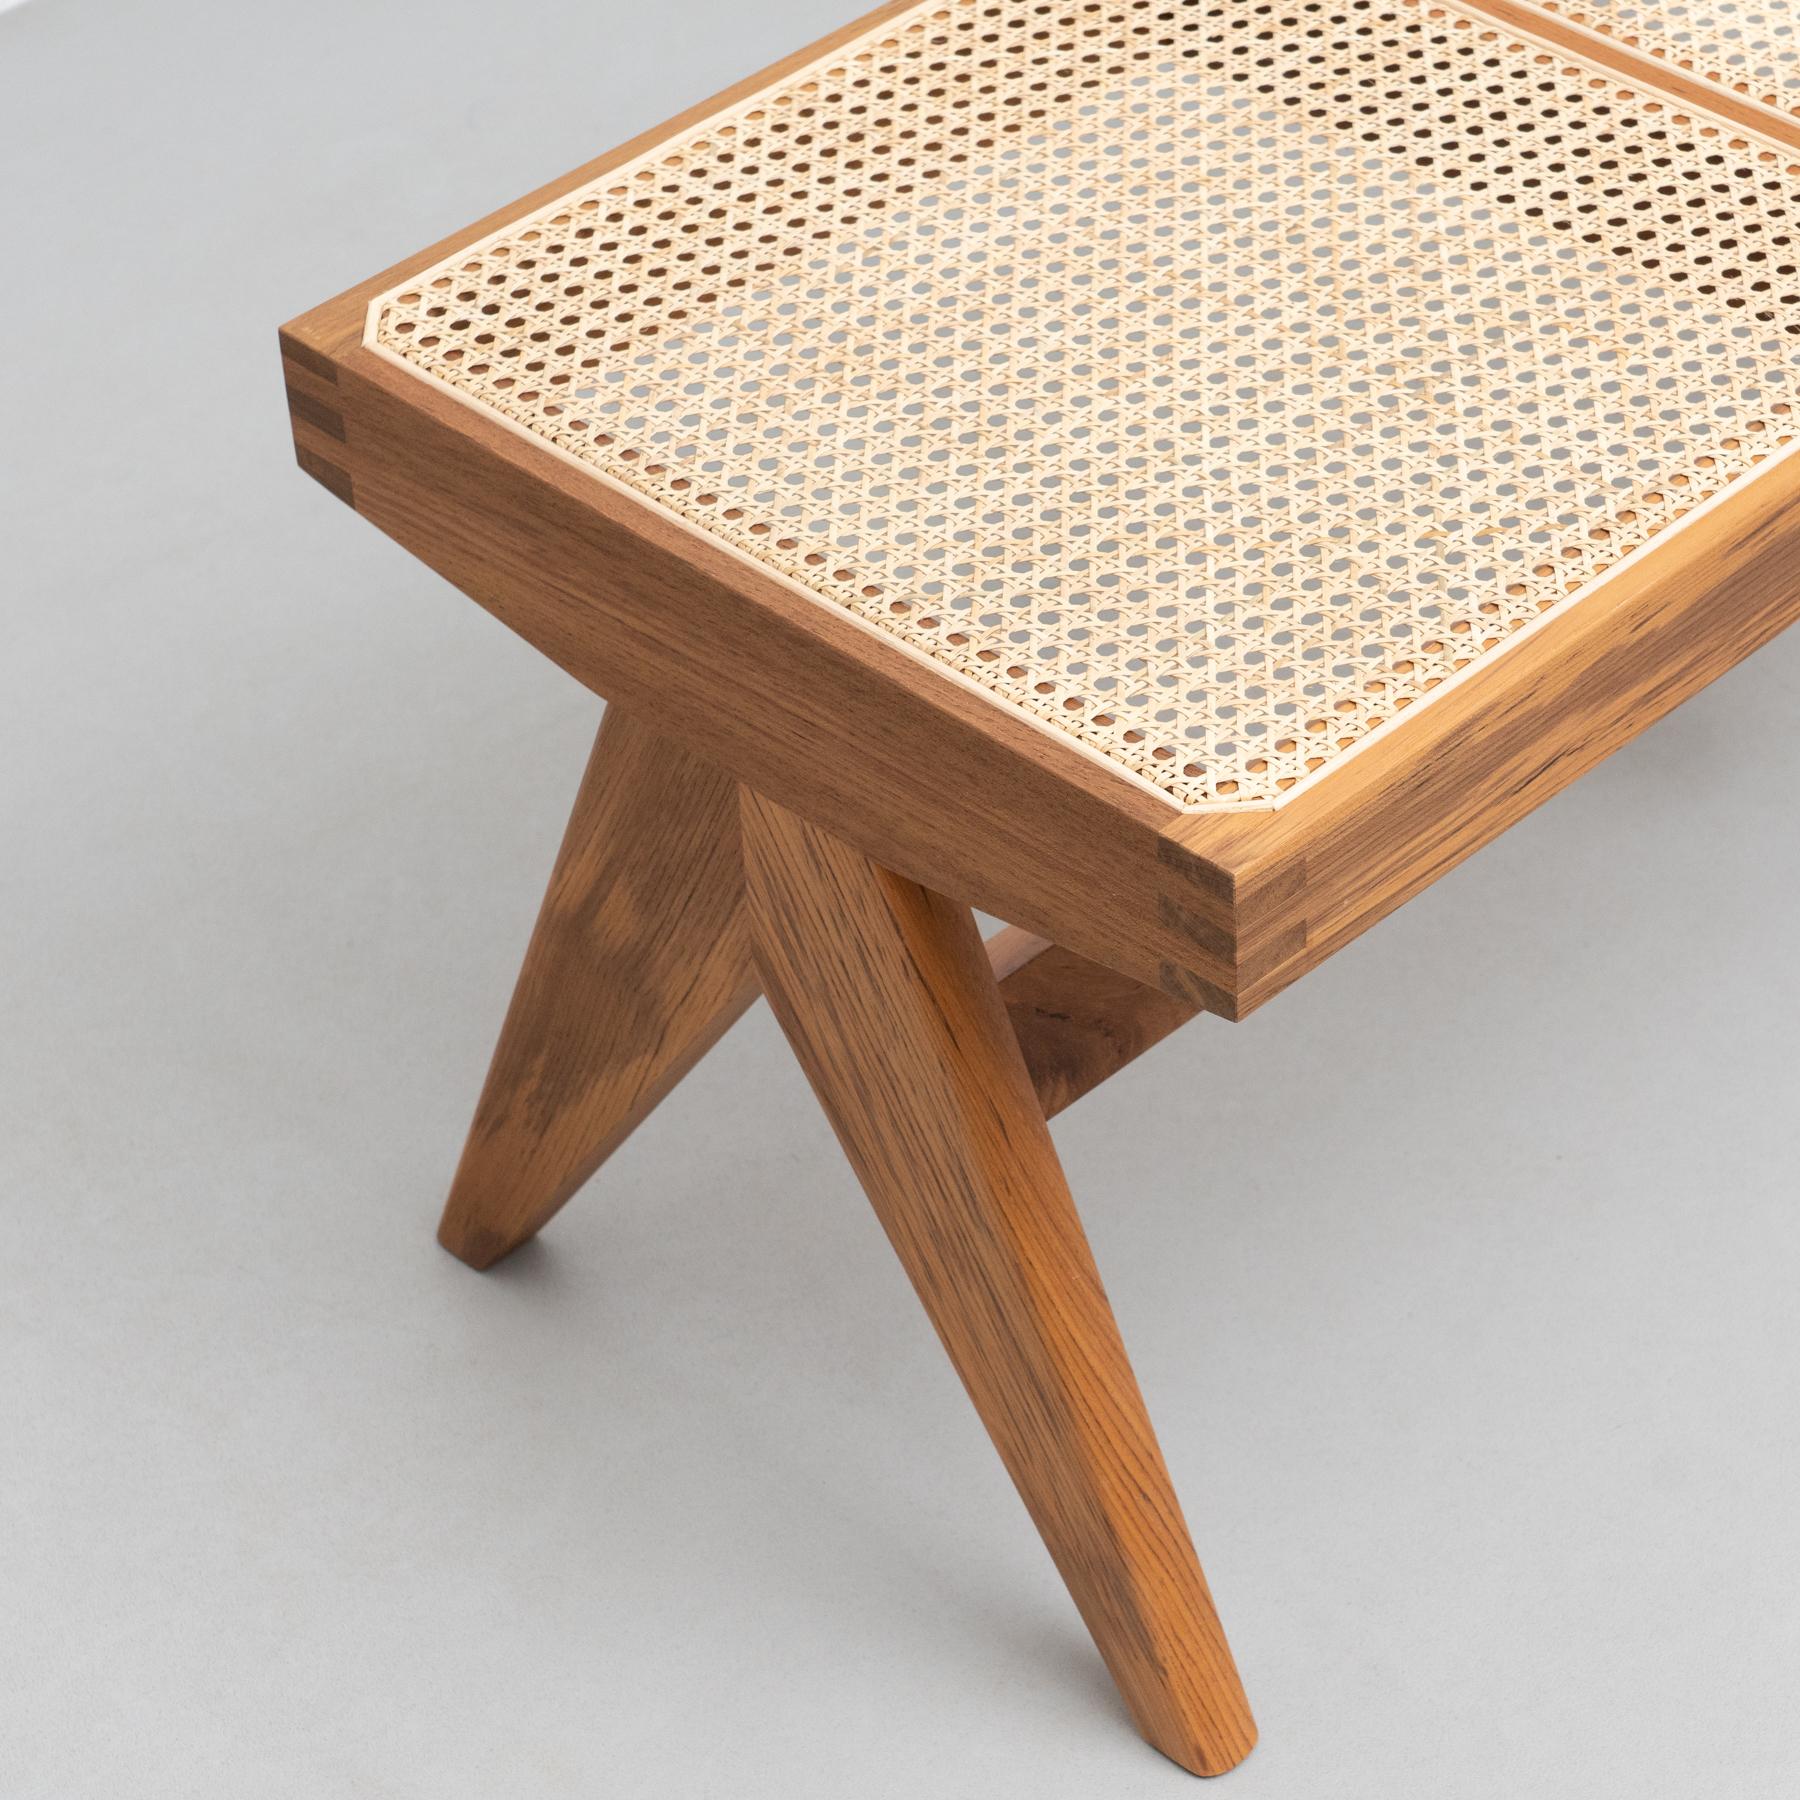 Pierre Jeanneret 057 Civil Bench, Wood and Woven Viennese Cane 5